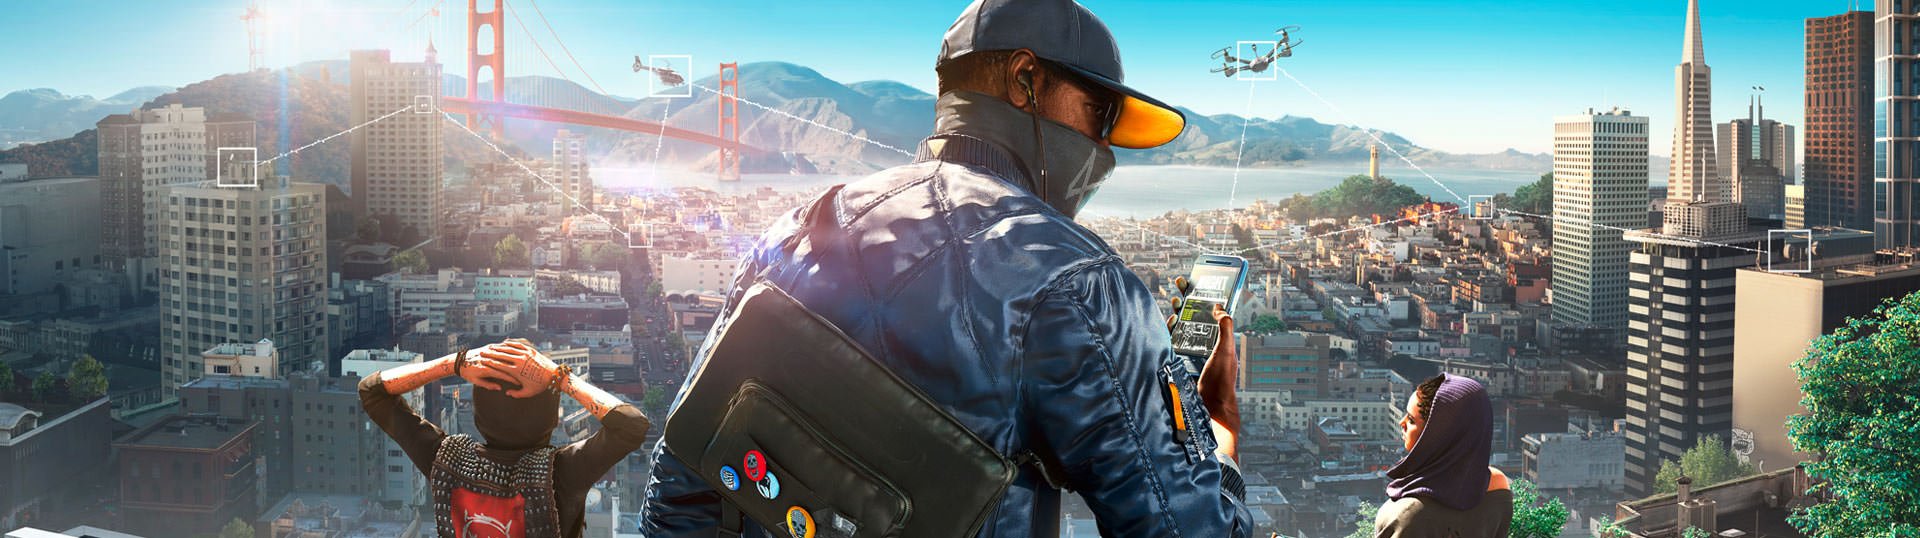 watch dogs 2 cyber monday